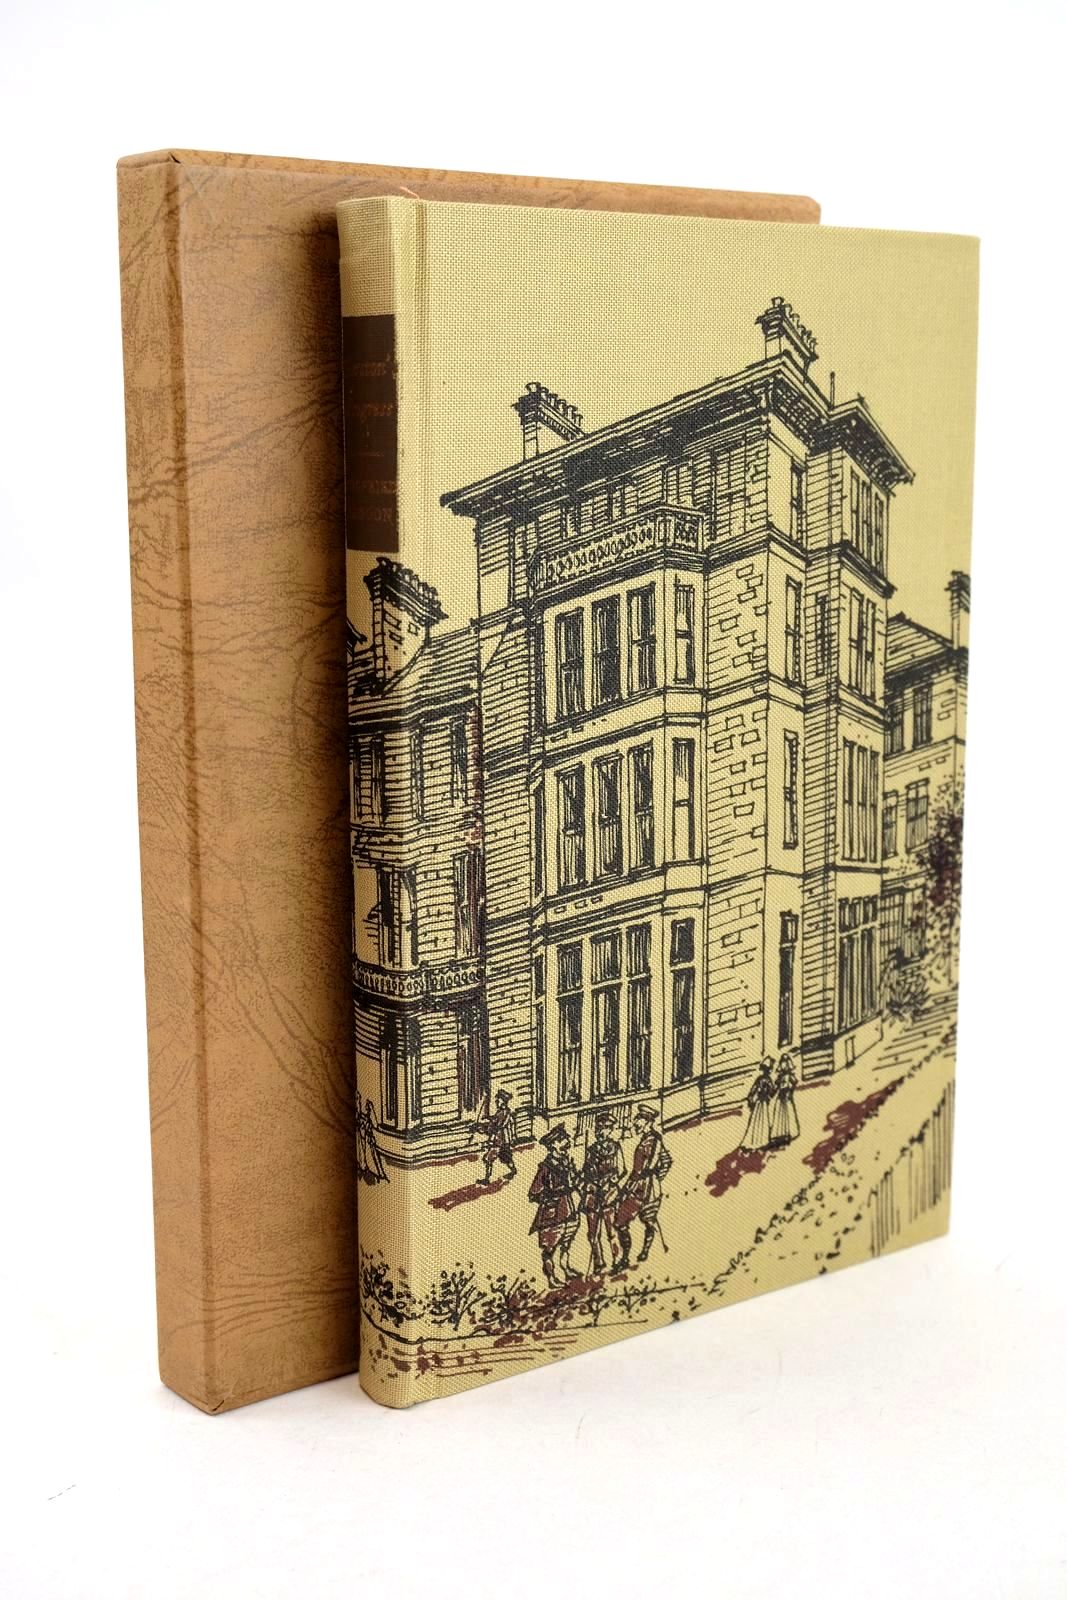 Photo of SHERSTON'S PROGRESS written by Sassoon, Siegfried illustrated by Lawrence, John published by Folio Society (STOCK CODE: 1326763)  for sale by Stella & Rose's Books